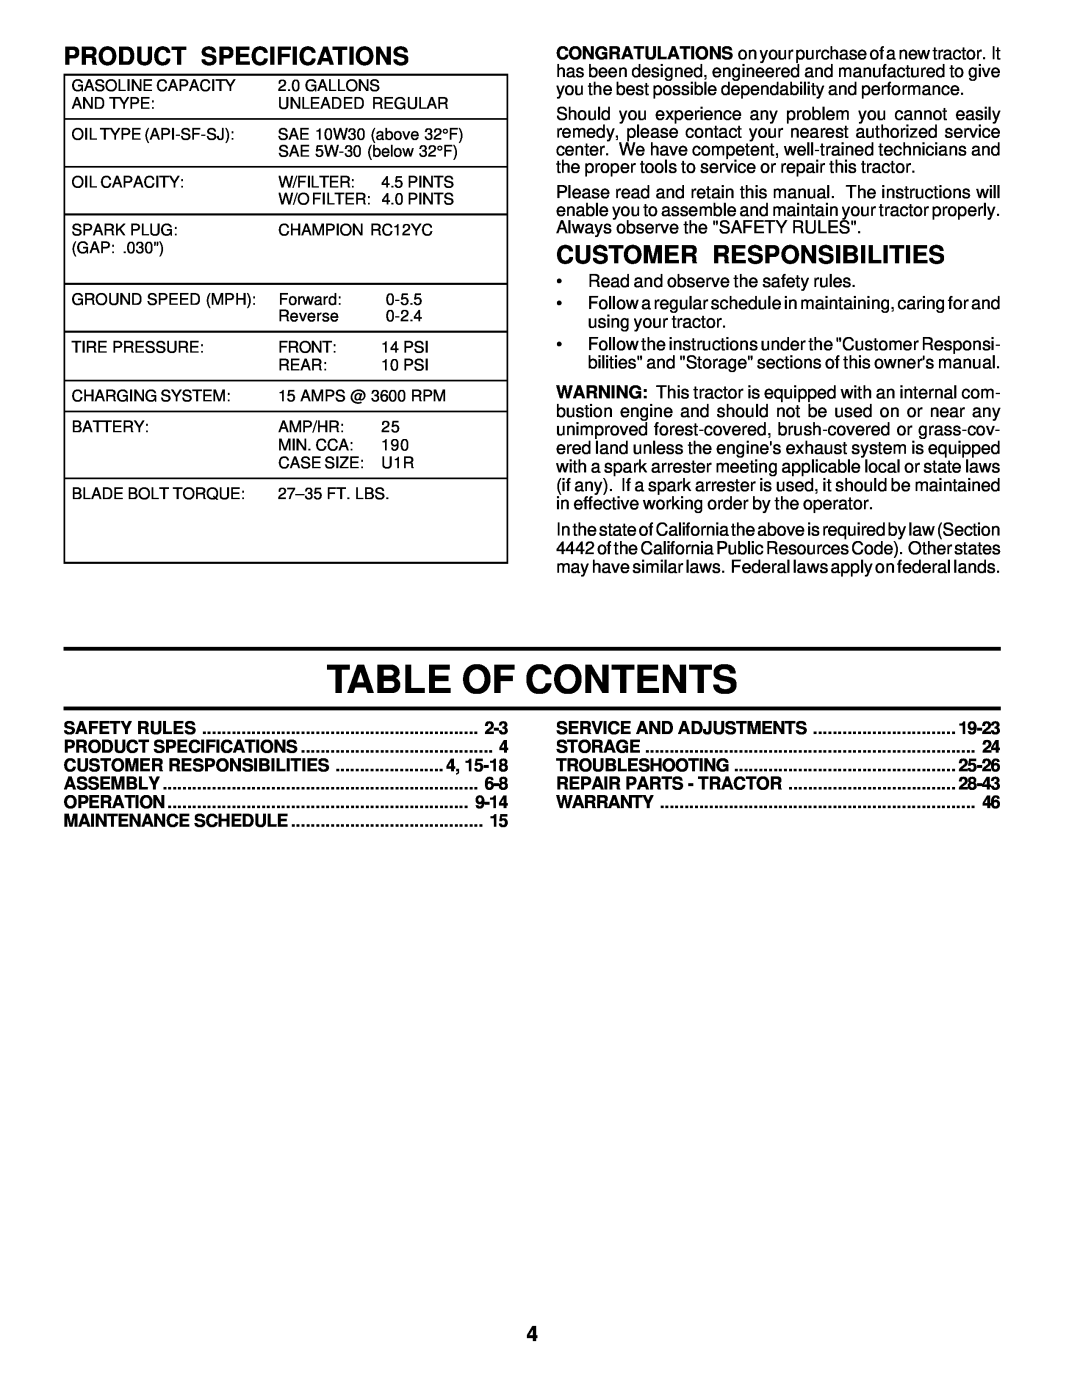 Poulan 178227 owner manual Table Of Contents, Product Specifications, Customer Responsibilities 